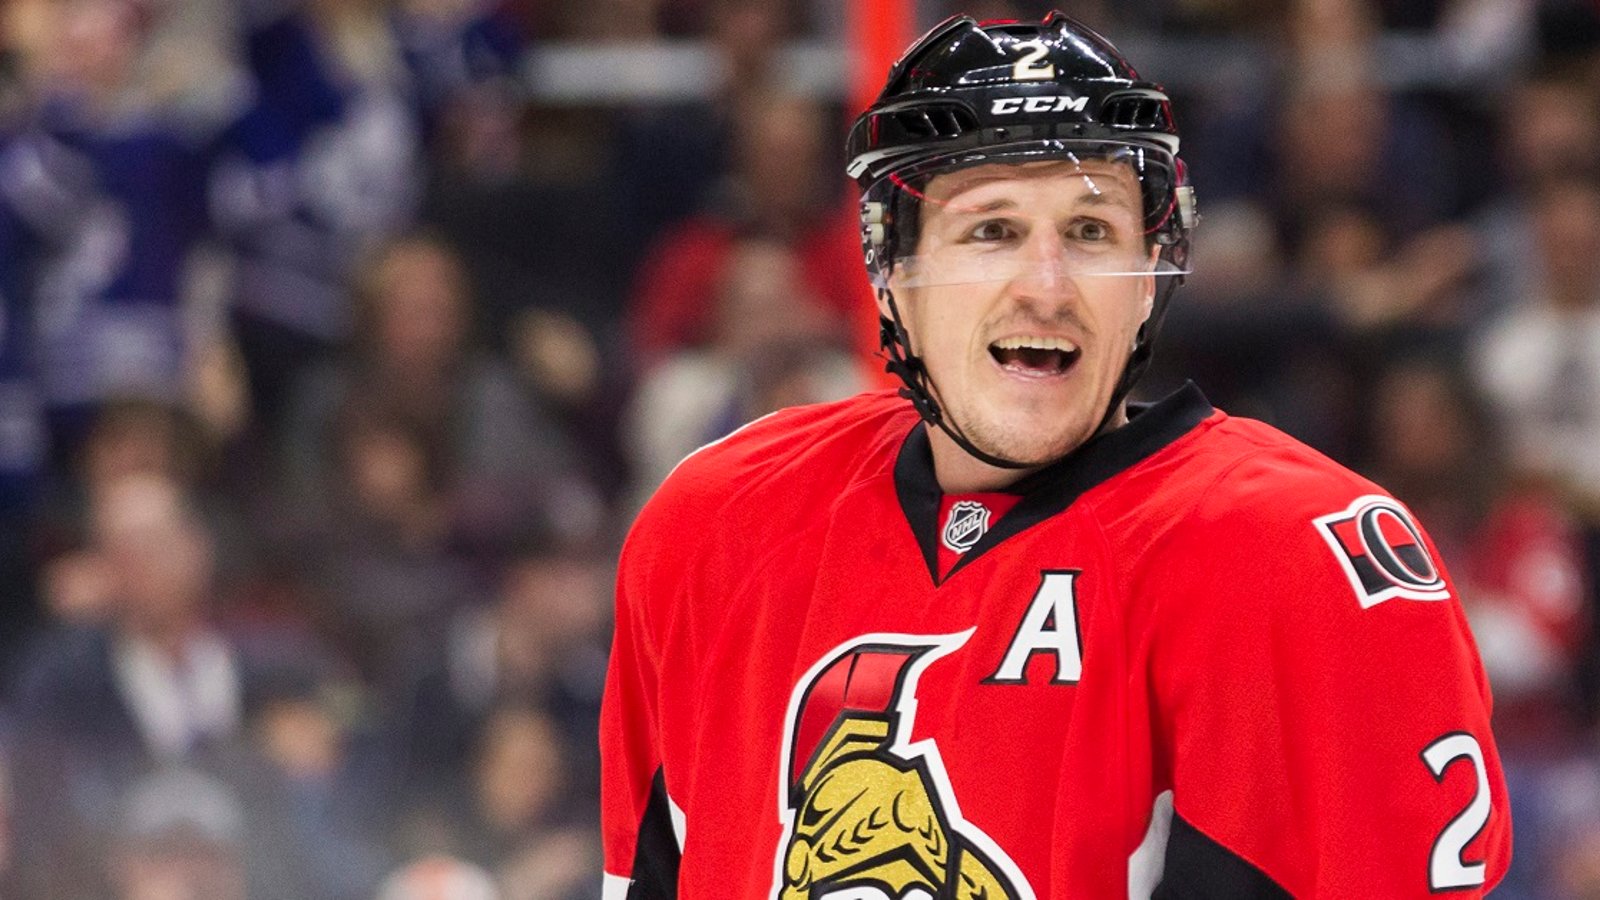 Breaking: Huge trade rumors involving Dion Phaneuf after refusing to waive for expansion draft.